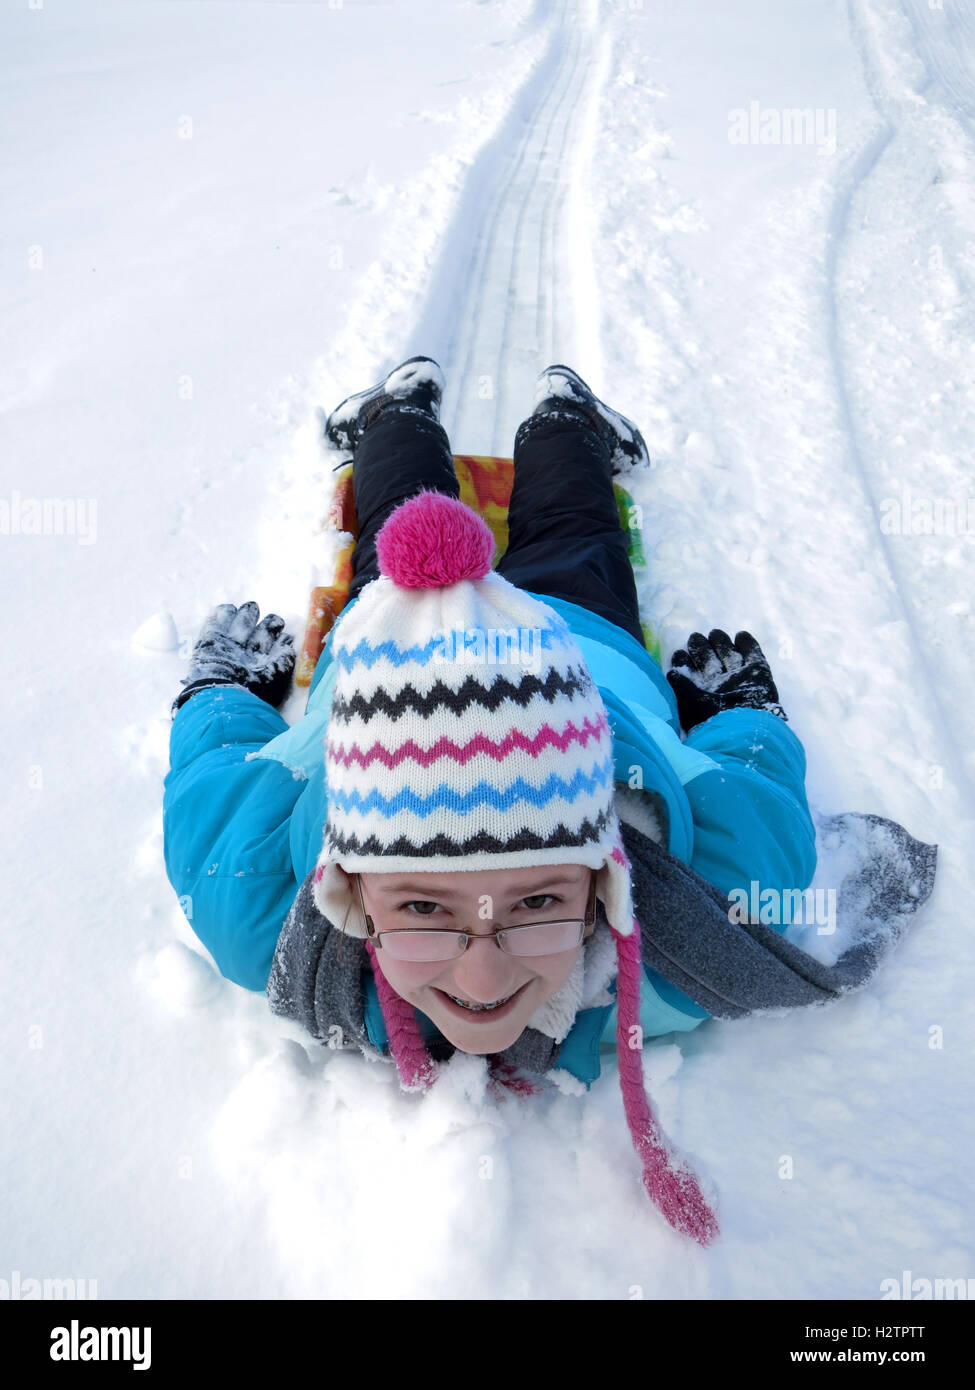 Kids sledding down snowy hill on sled fast speed Stock Photo